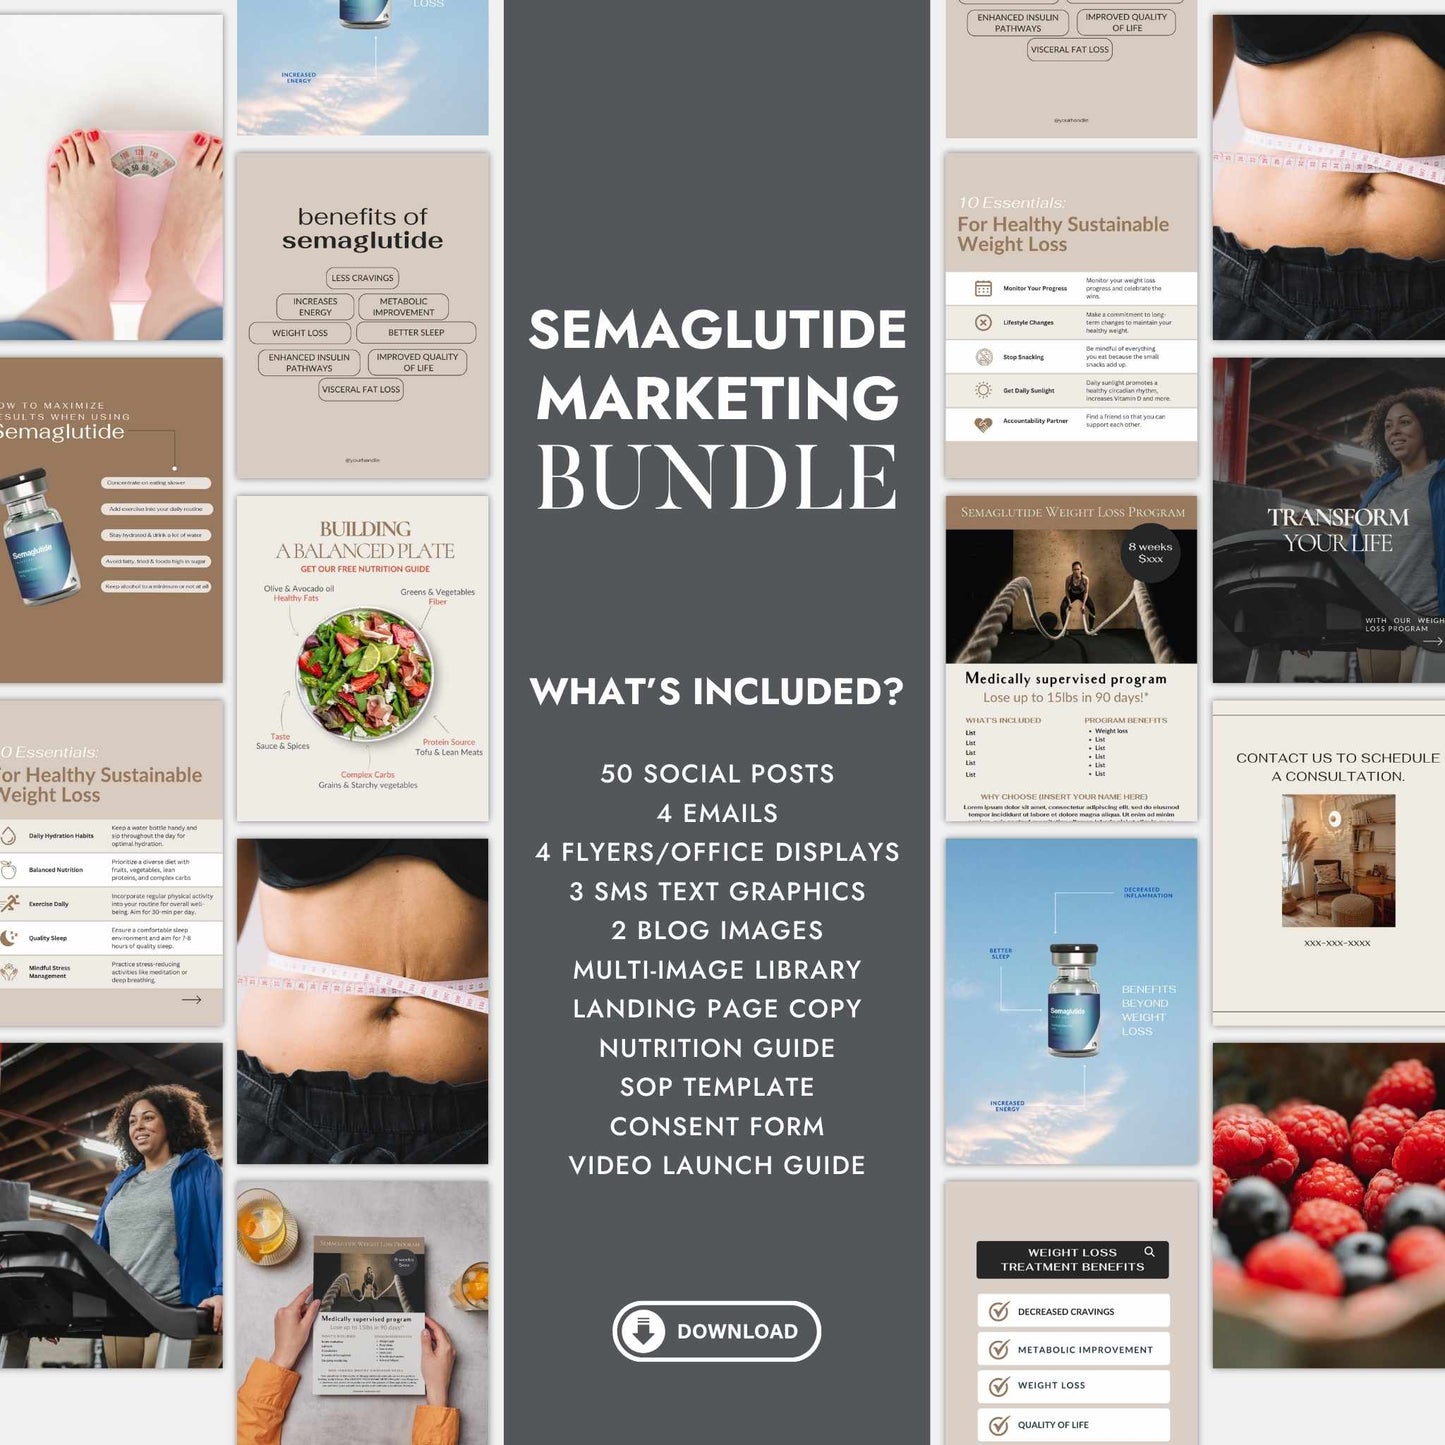 whats-included-semaglutide-marketing-bundle